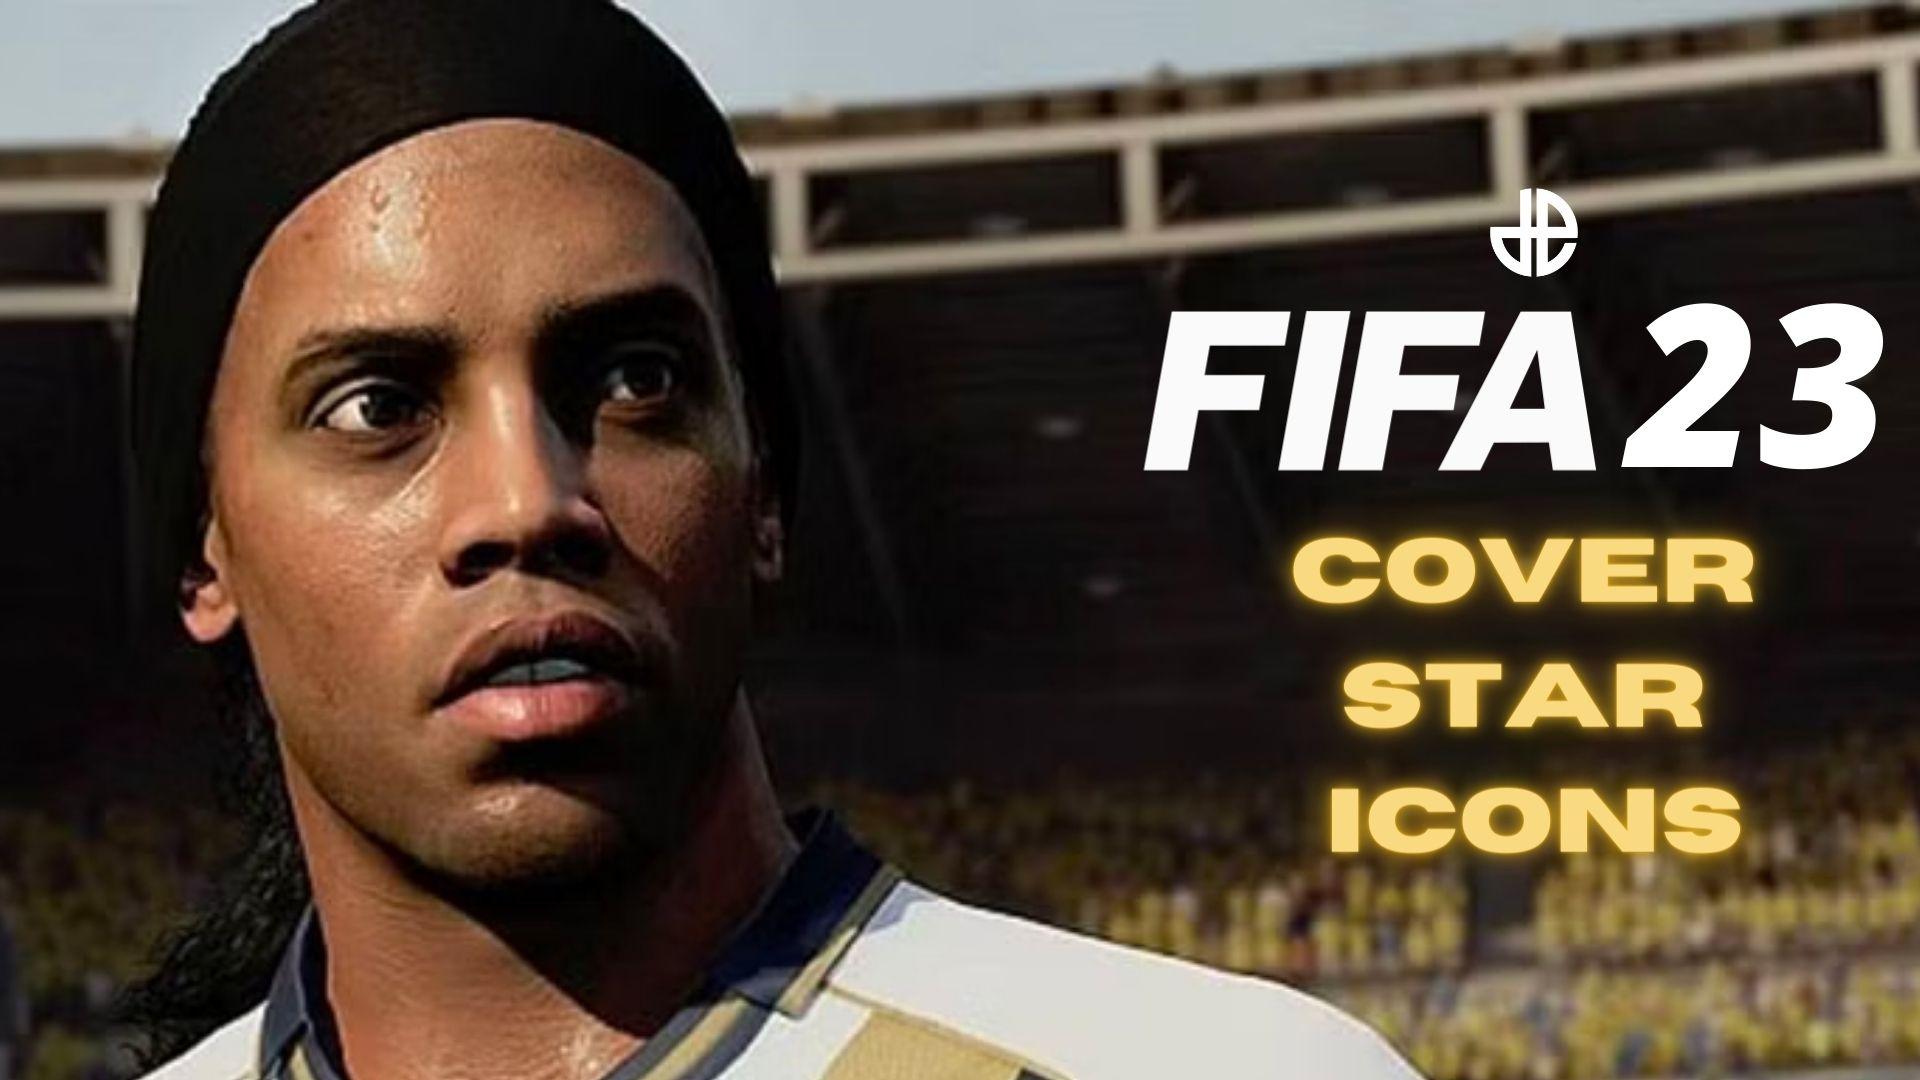 Ronaldinho in fifa 23 with cover star icons text next to him